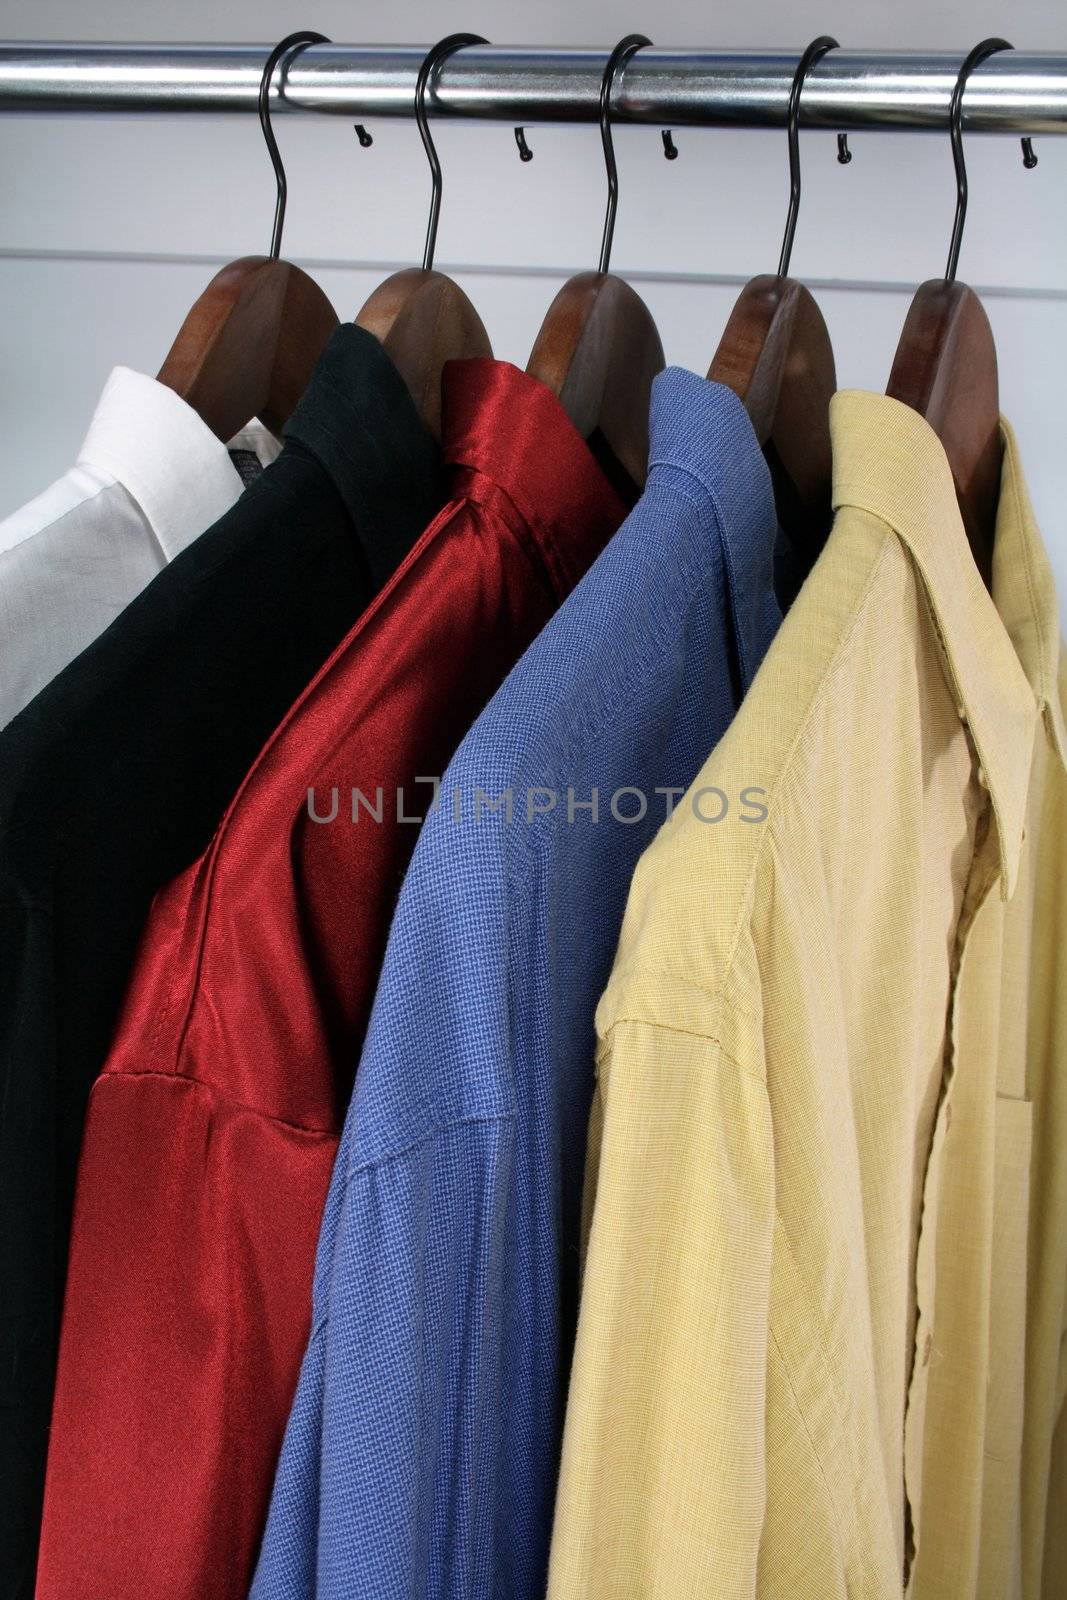 Colorful shirts on wooden hangers by anikasalsera